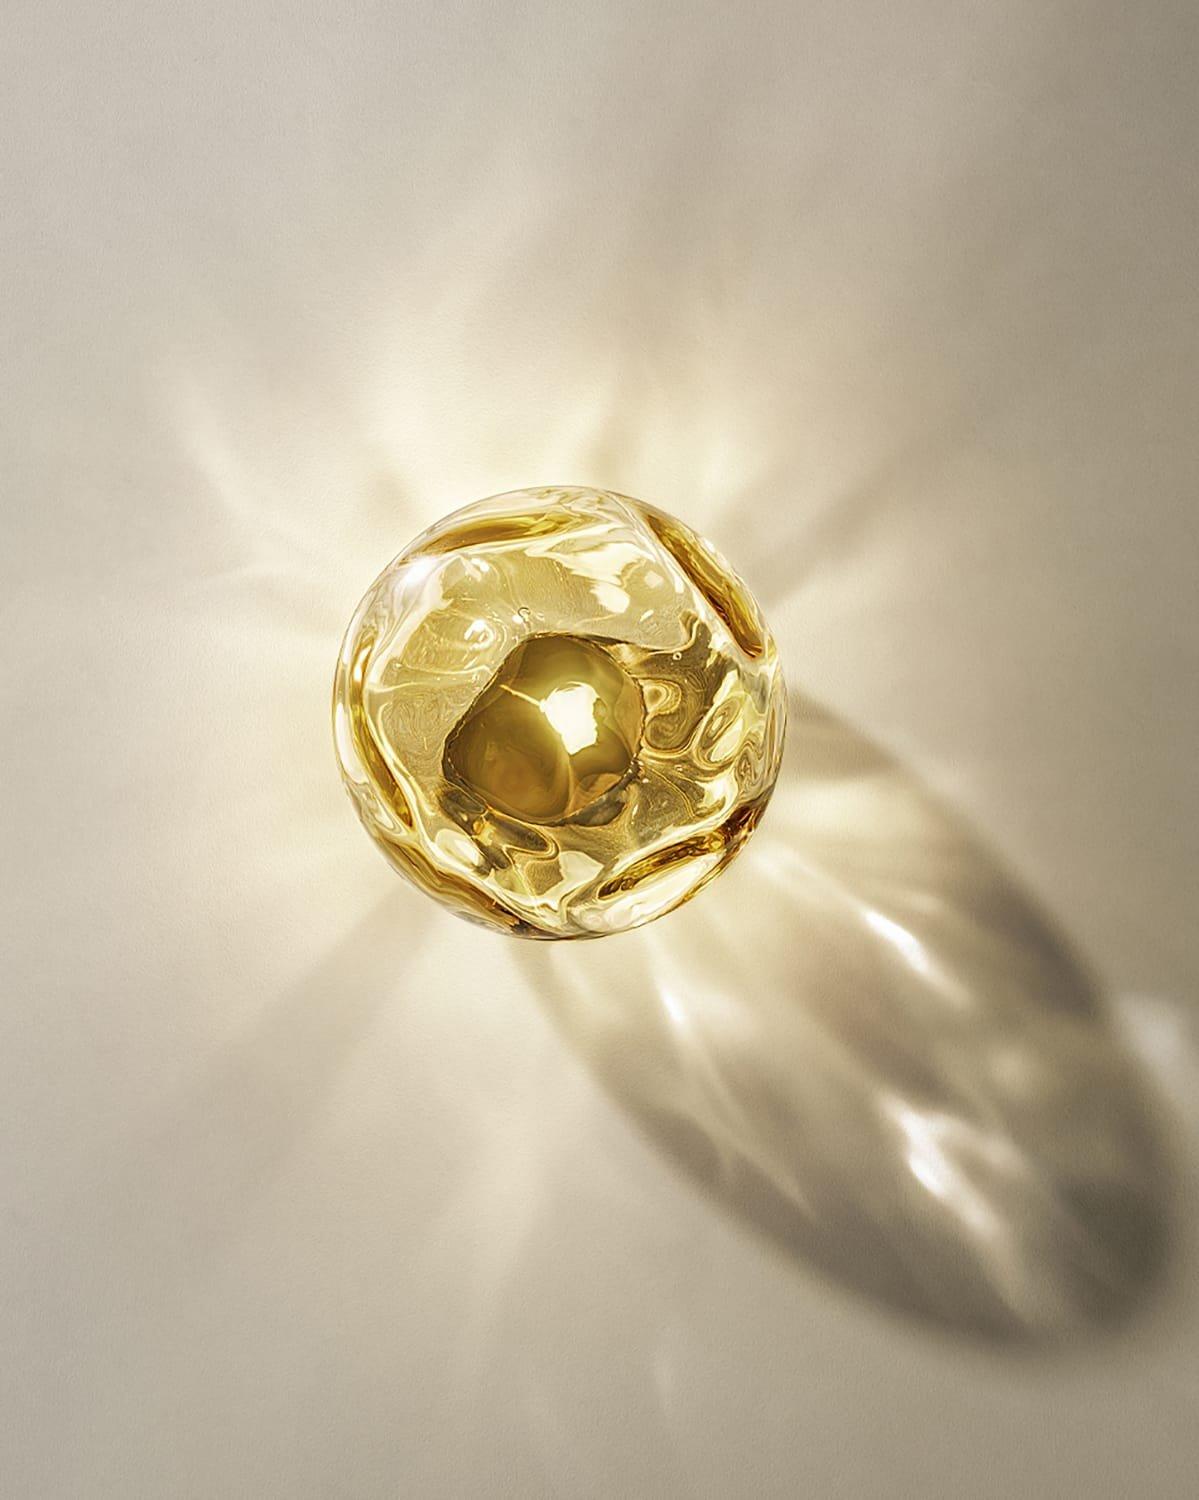 Murané blown glass orb wall light by Panzeri on Nook Collections